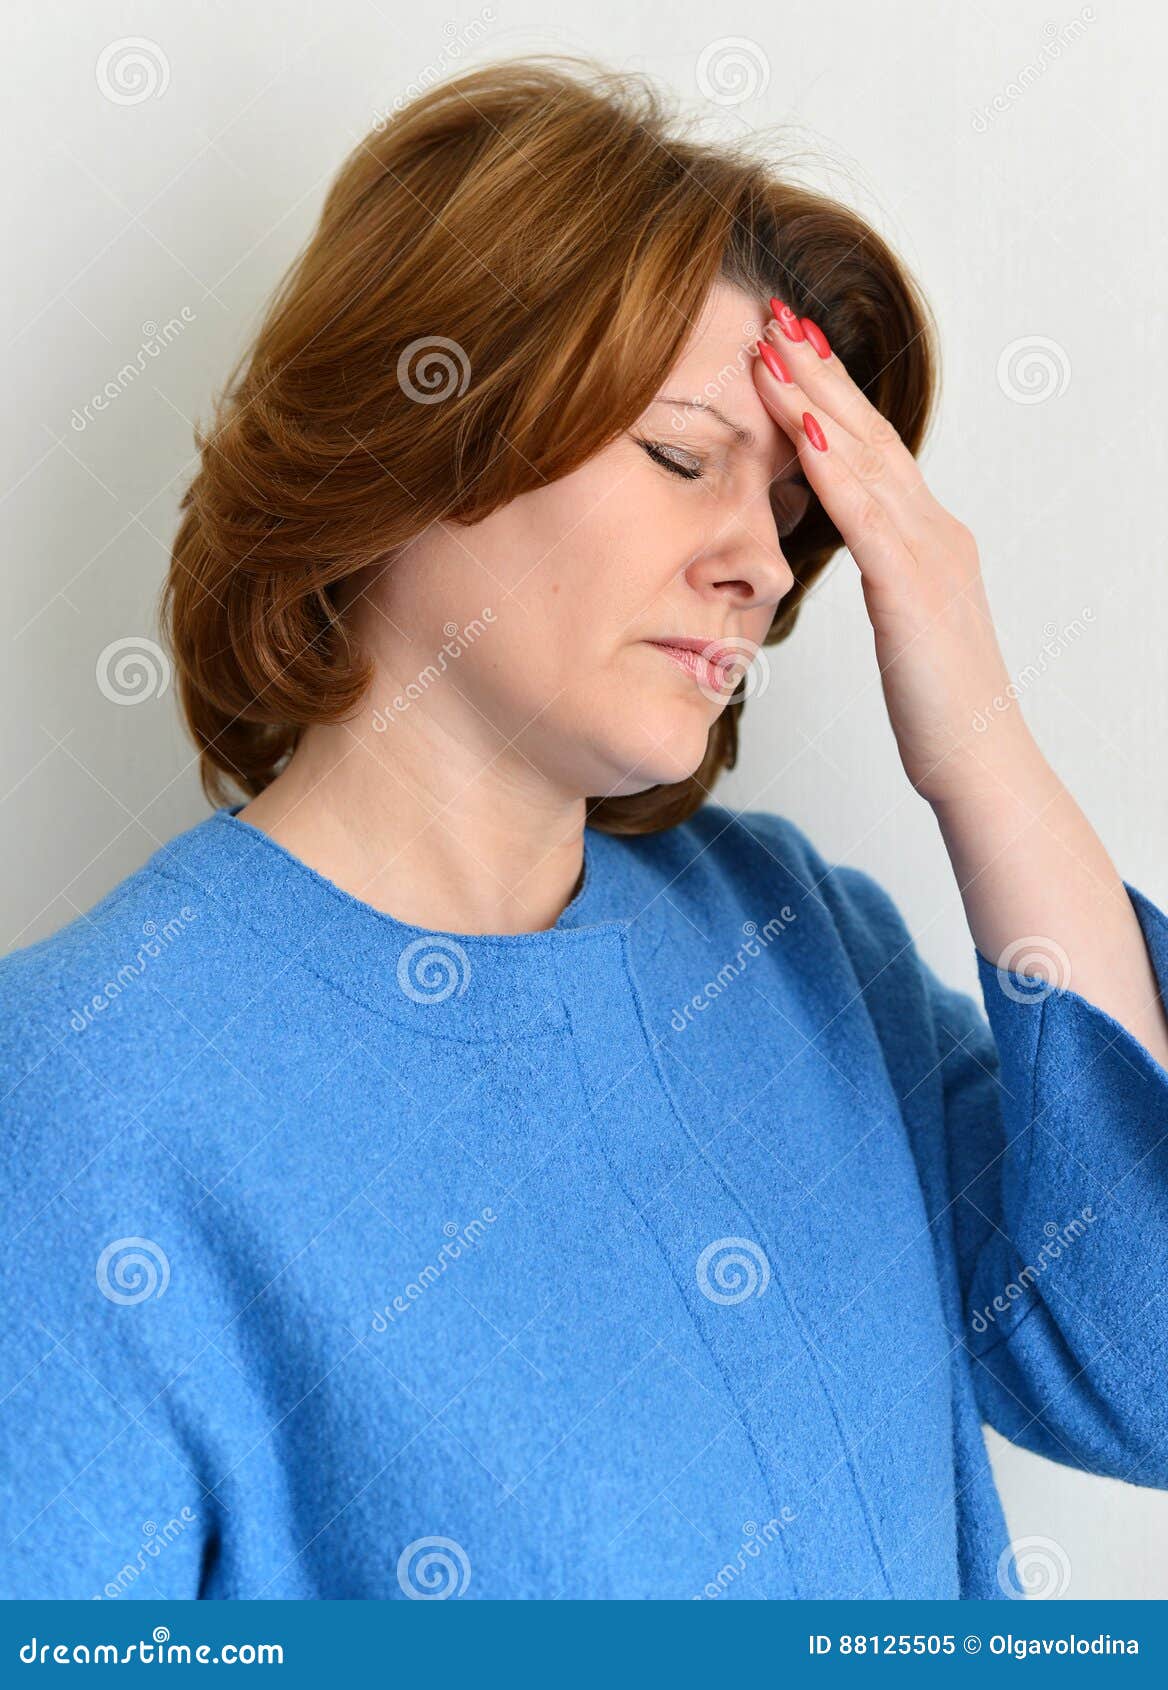 Portrait of a woman experiencing a migraine